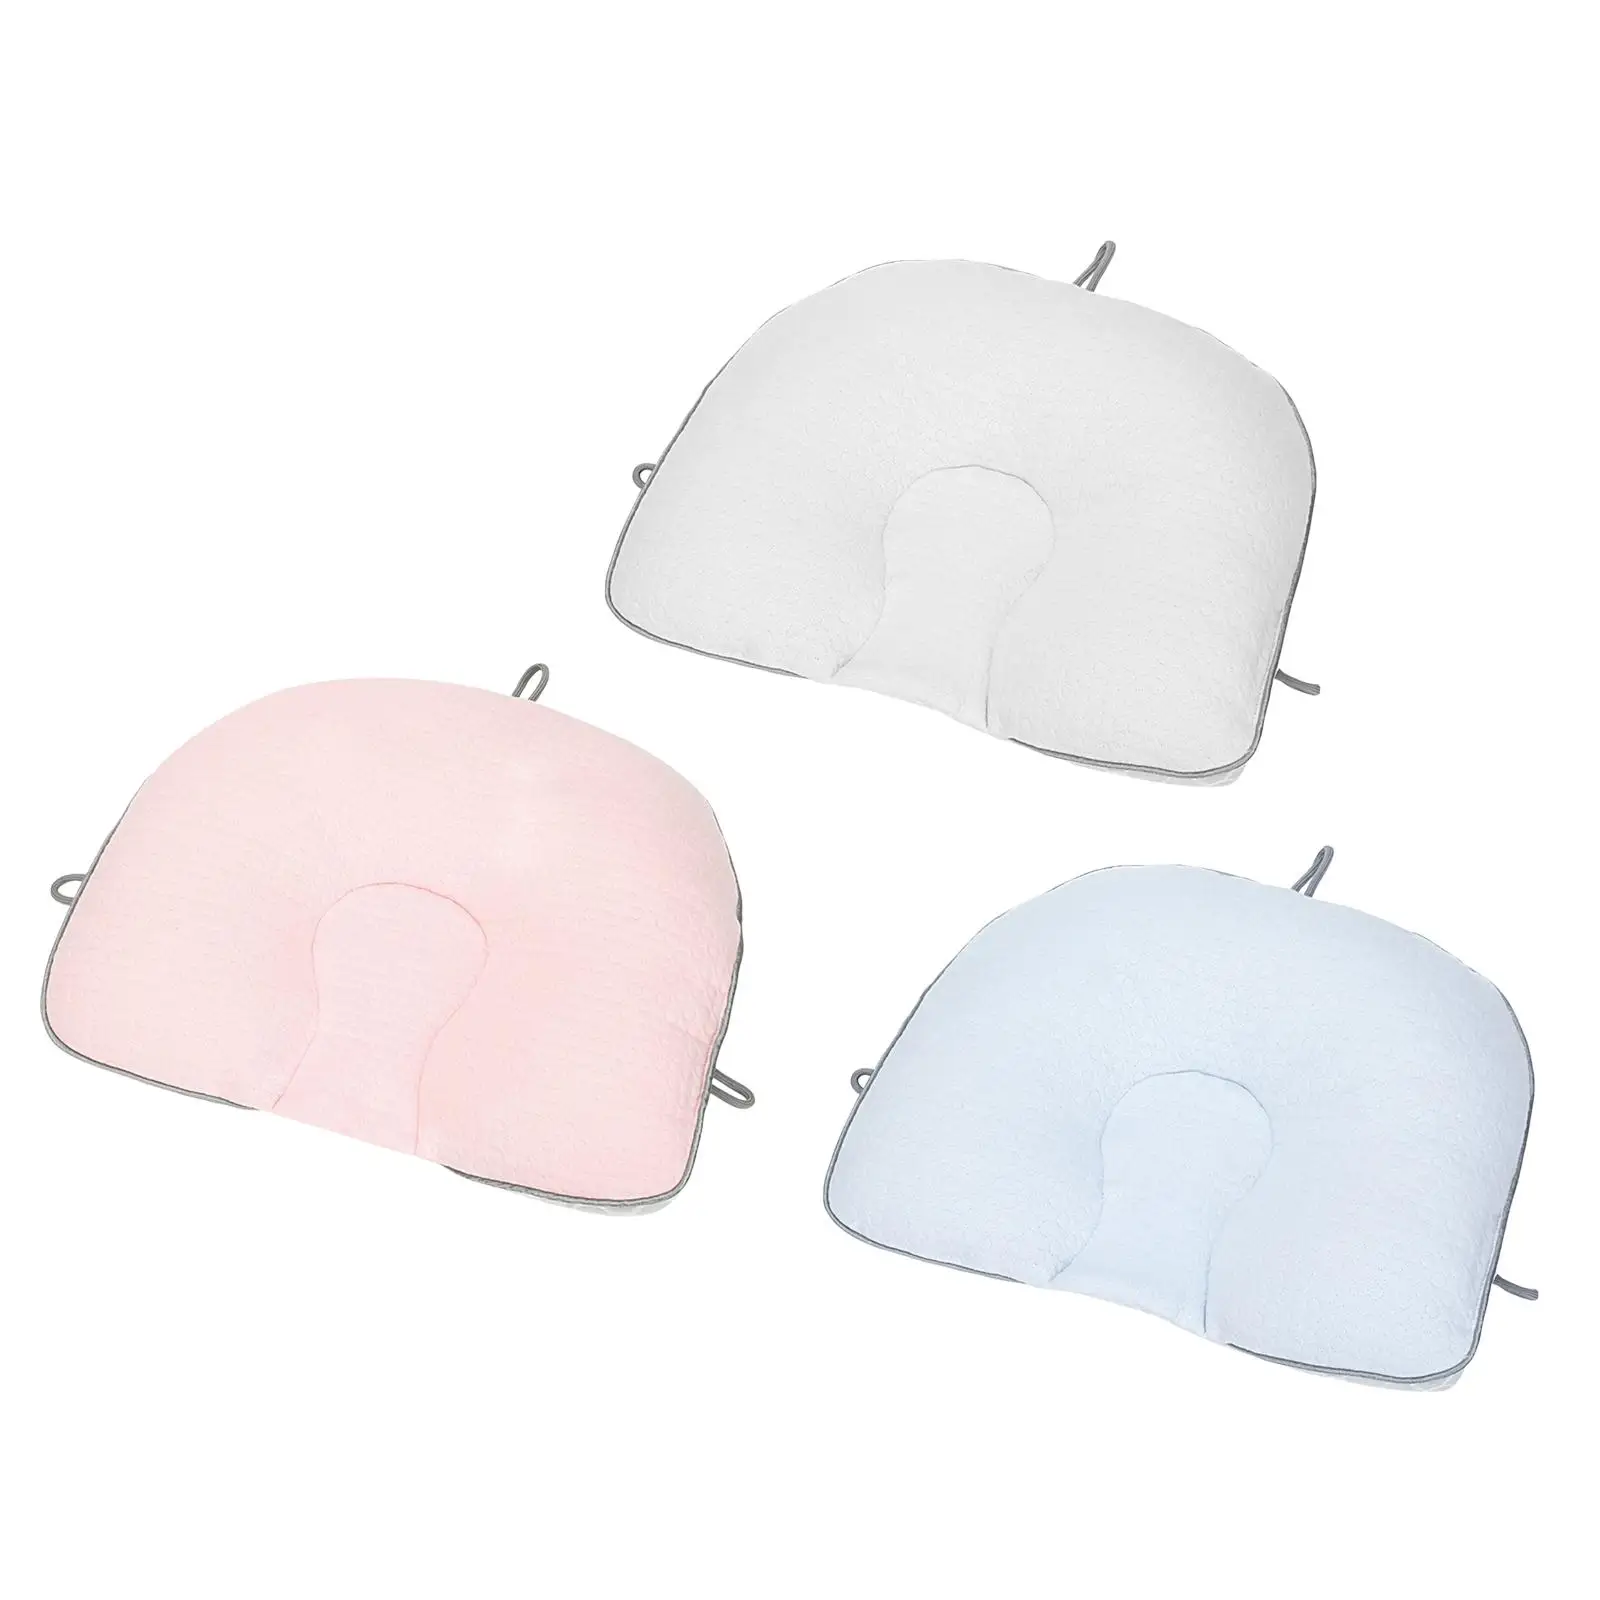 Ergonomic Infant pillow for Sleeping Adjustable 0-12 Months Baby Head Pillow